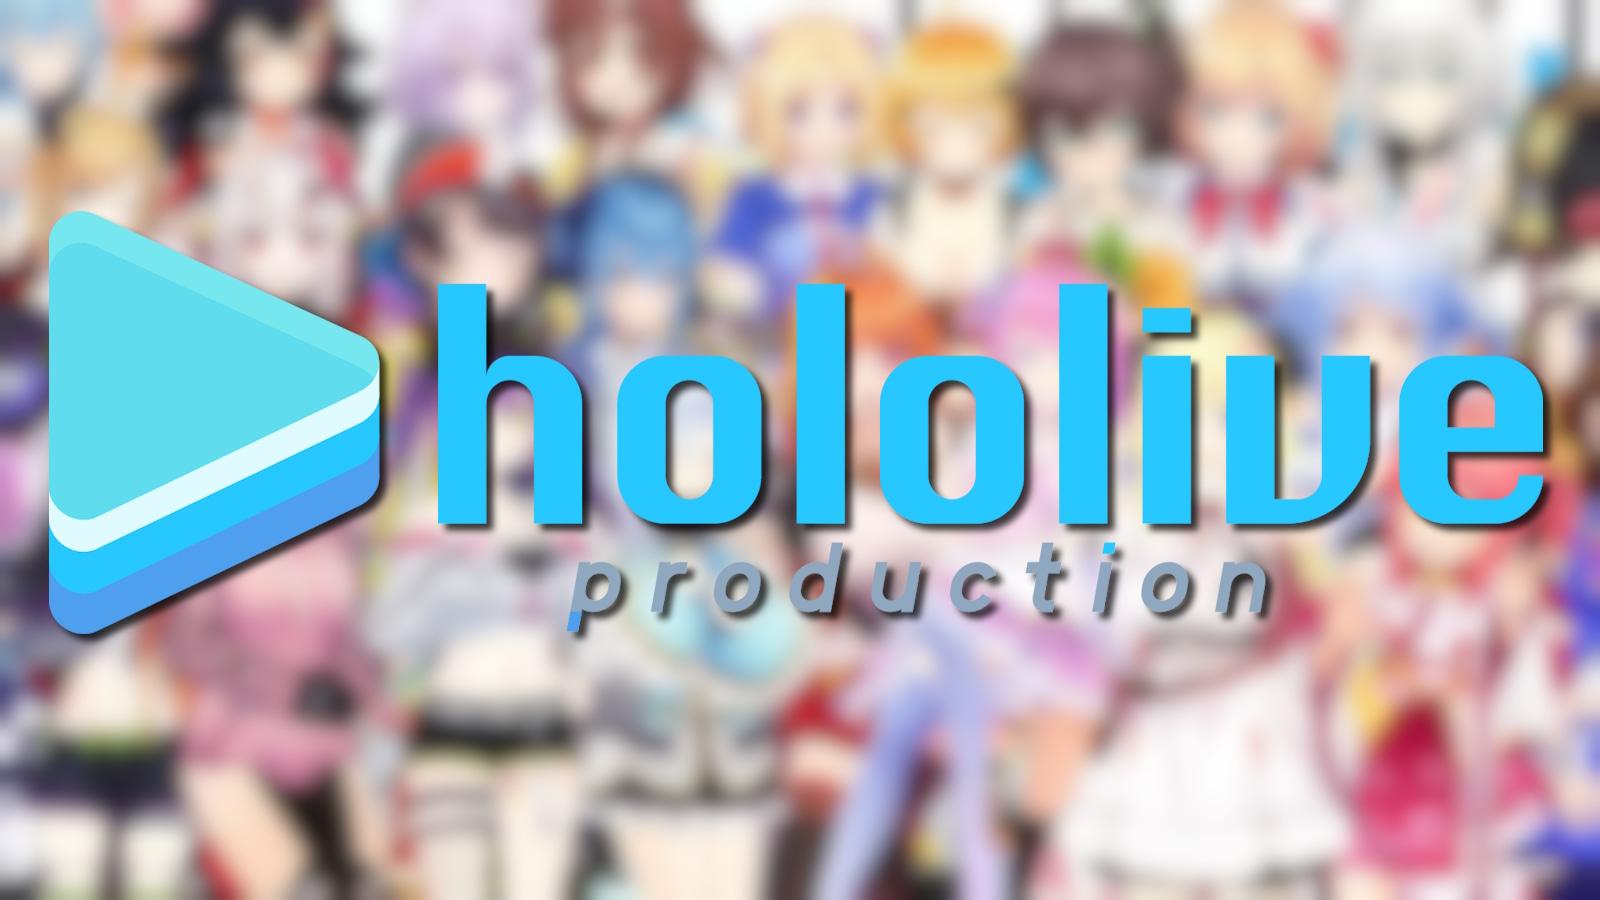 Blurred image of various Hololive Japan members with company logo in foreground.